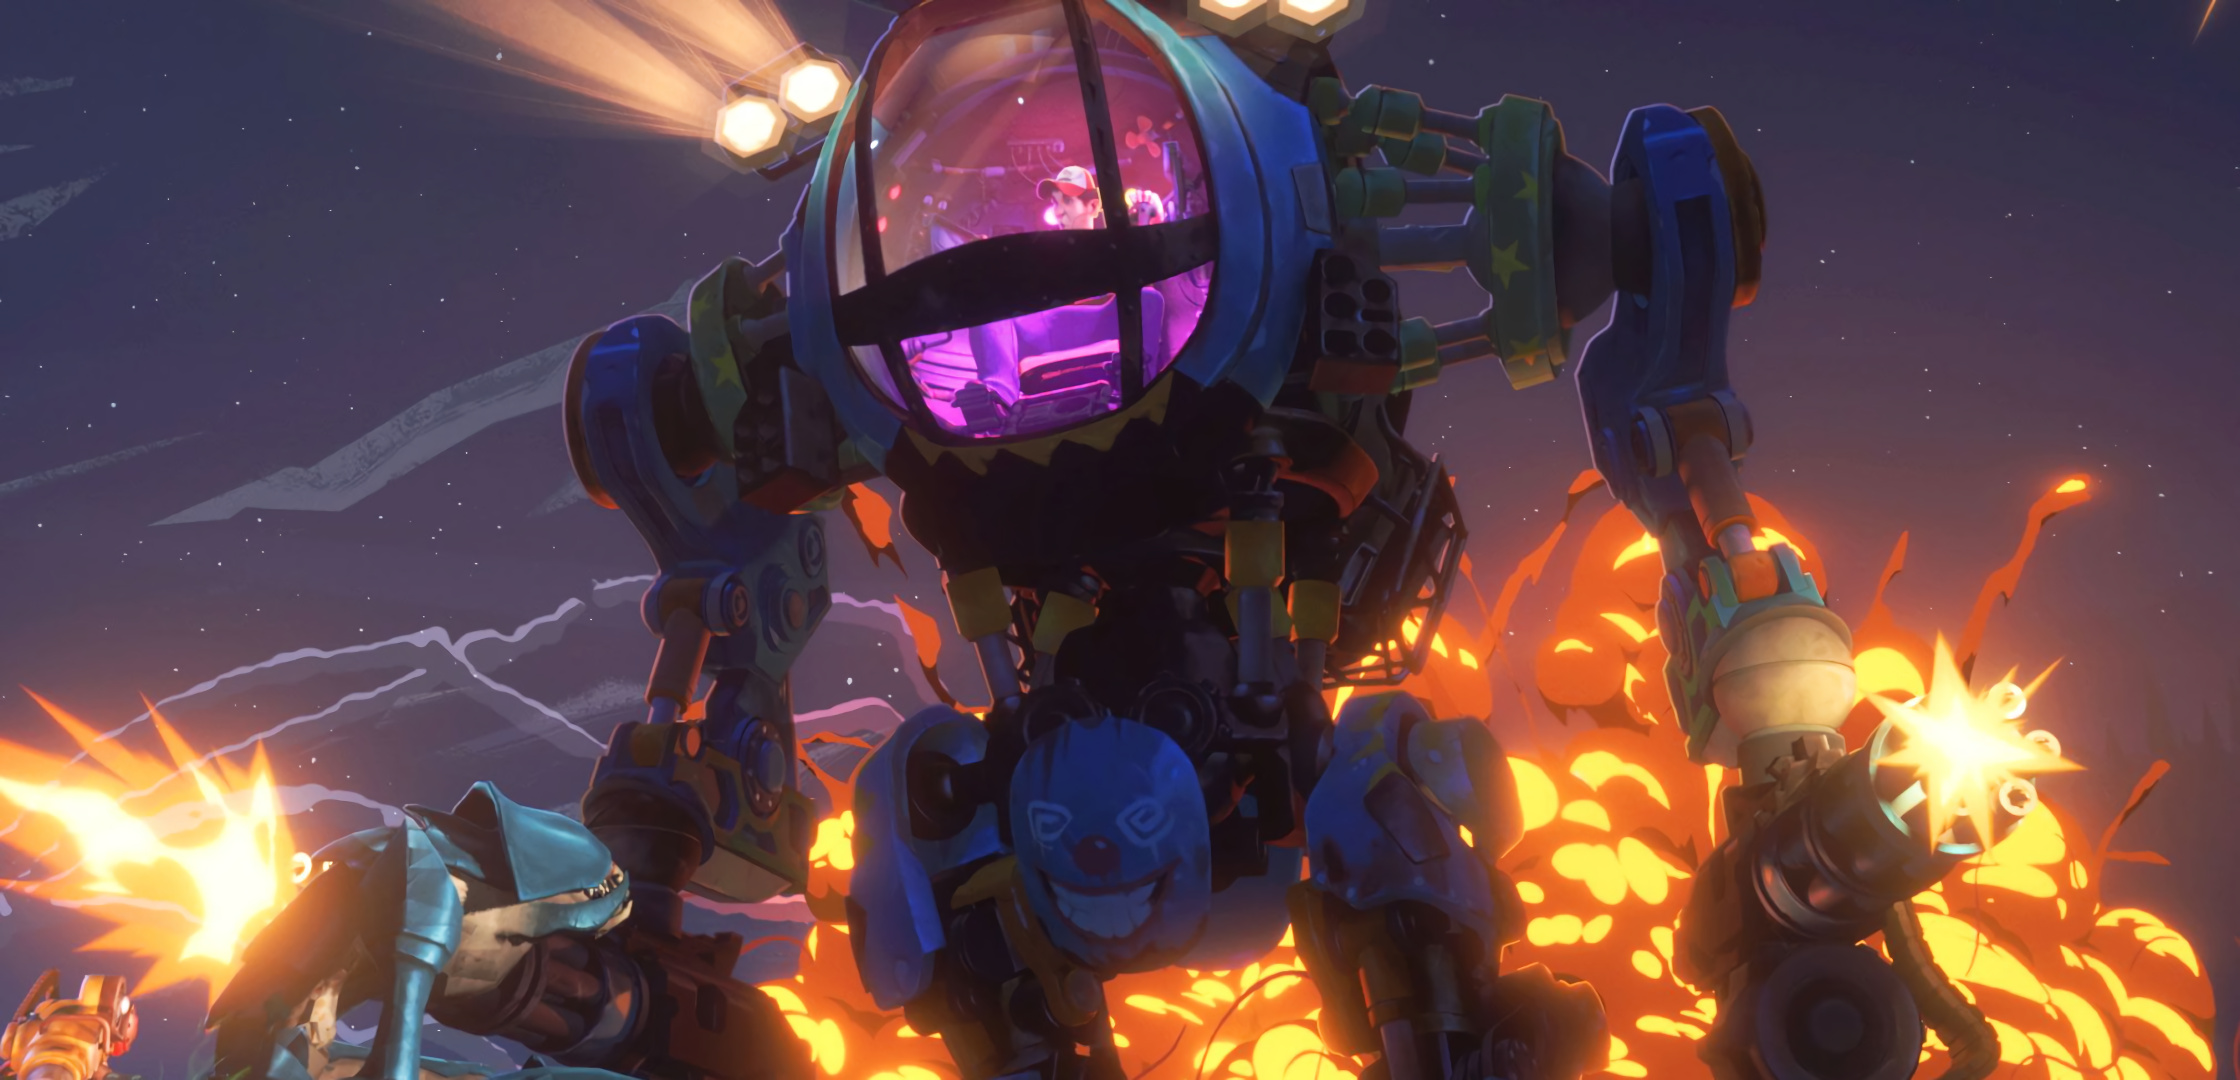 Love, Death and Robots (Volume II), Animation anthology, Futuristic storytelling, Dynamic visuals, 2240x1080 Dual Screen Desktop